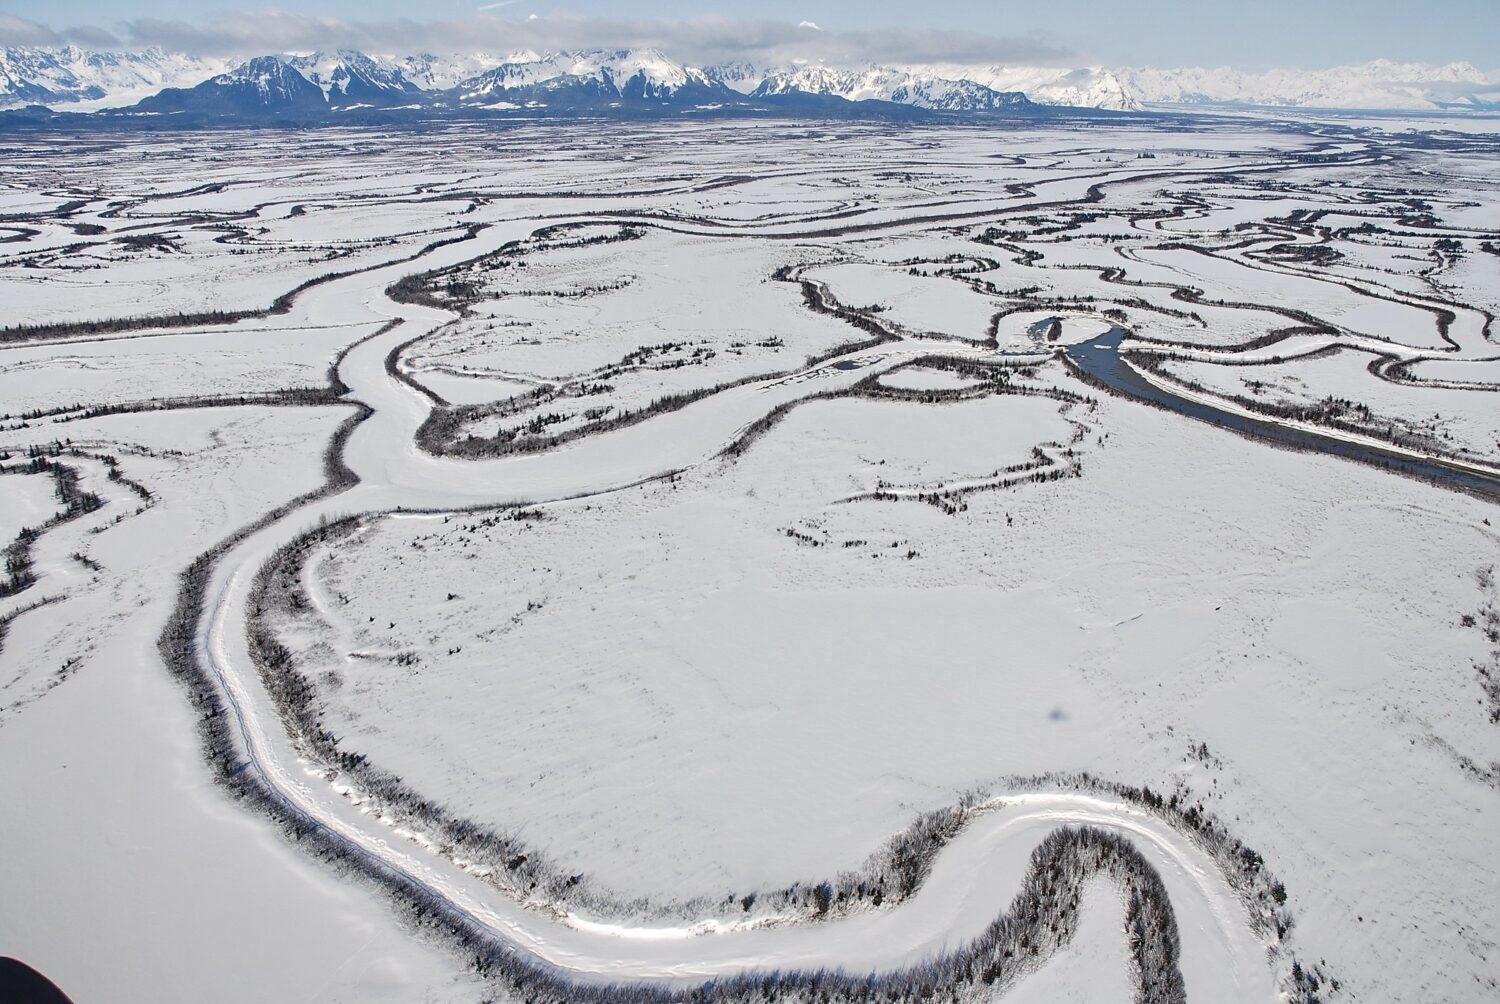 An aerial view of meandering frozen channels of the Copper River in Alaska.